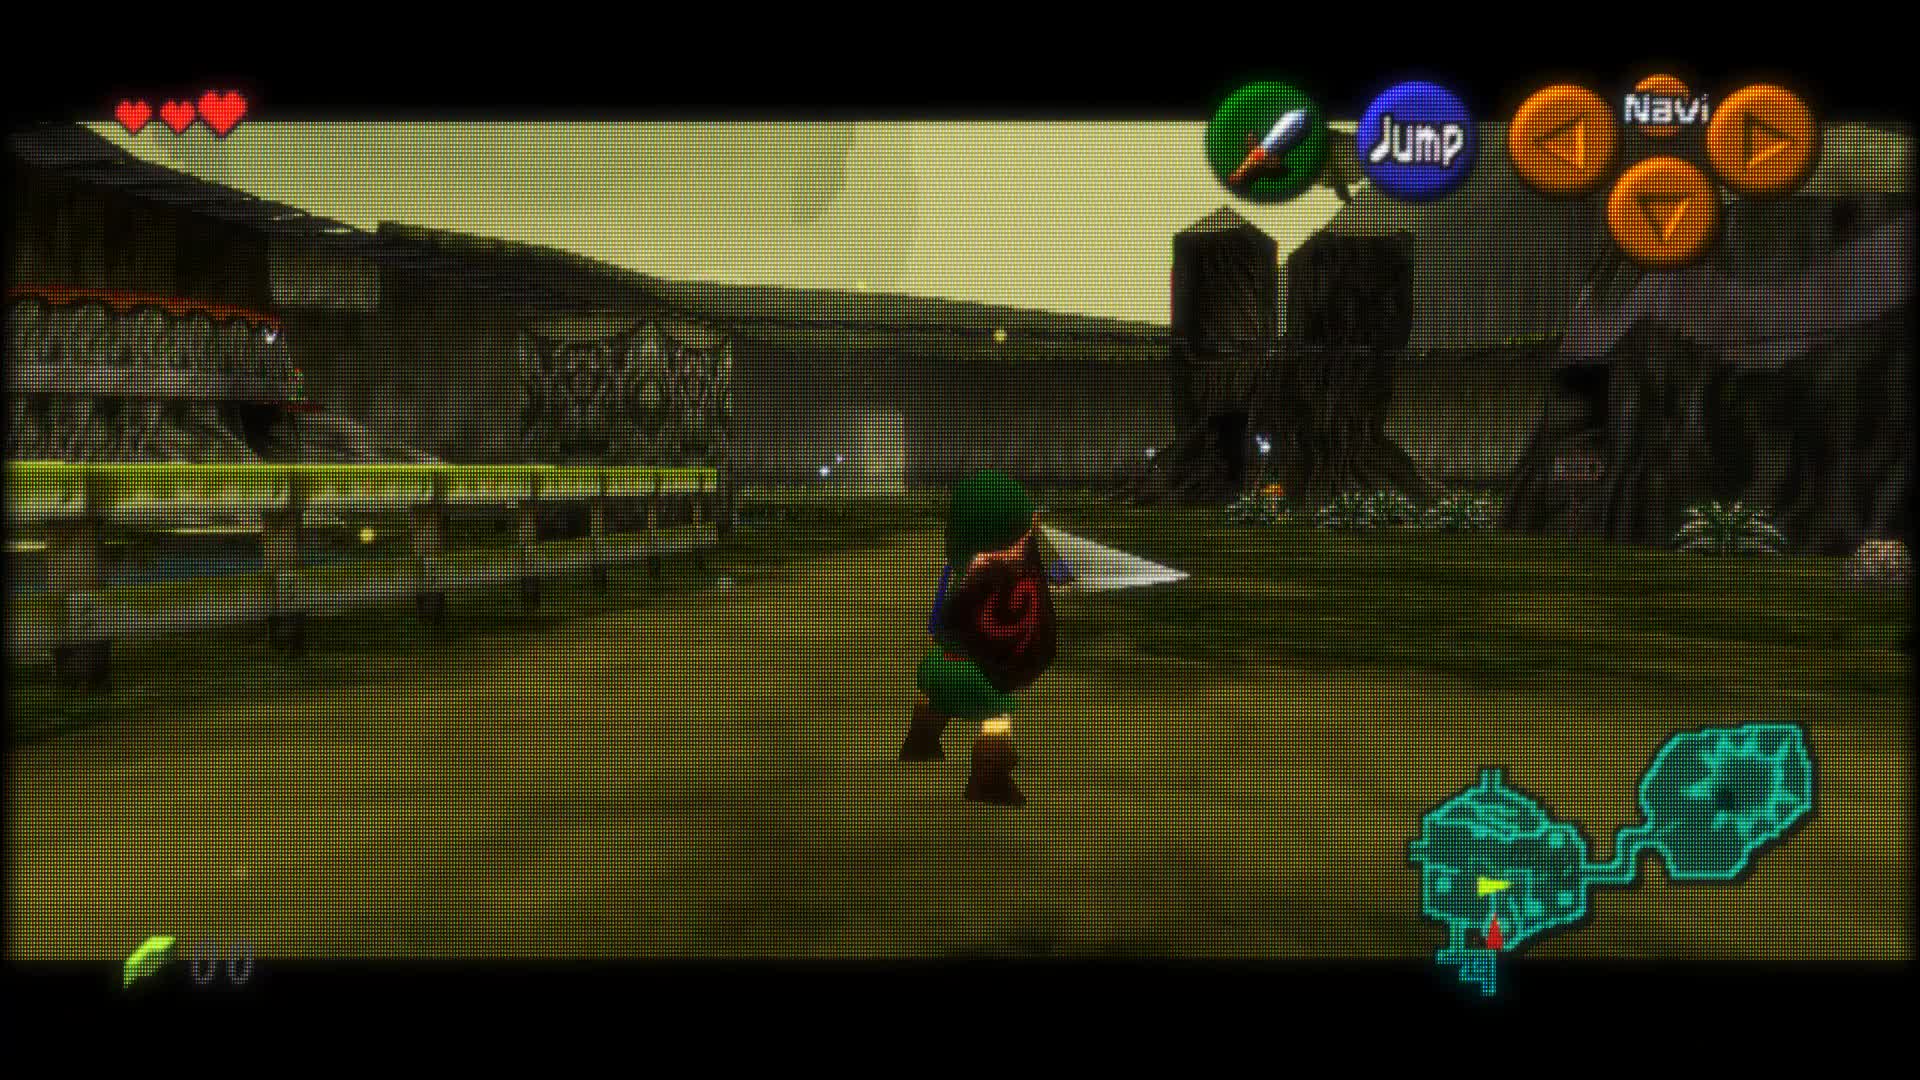 Zelda: Ocarina of Time's PC port (unofficial) now supports 60fps